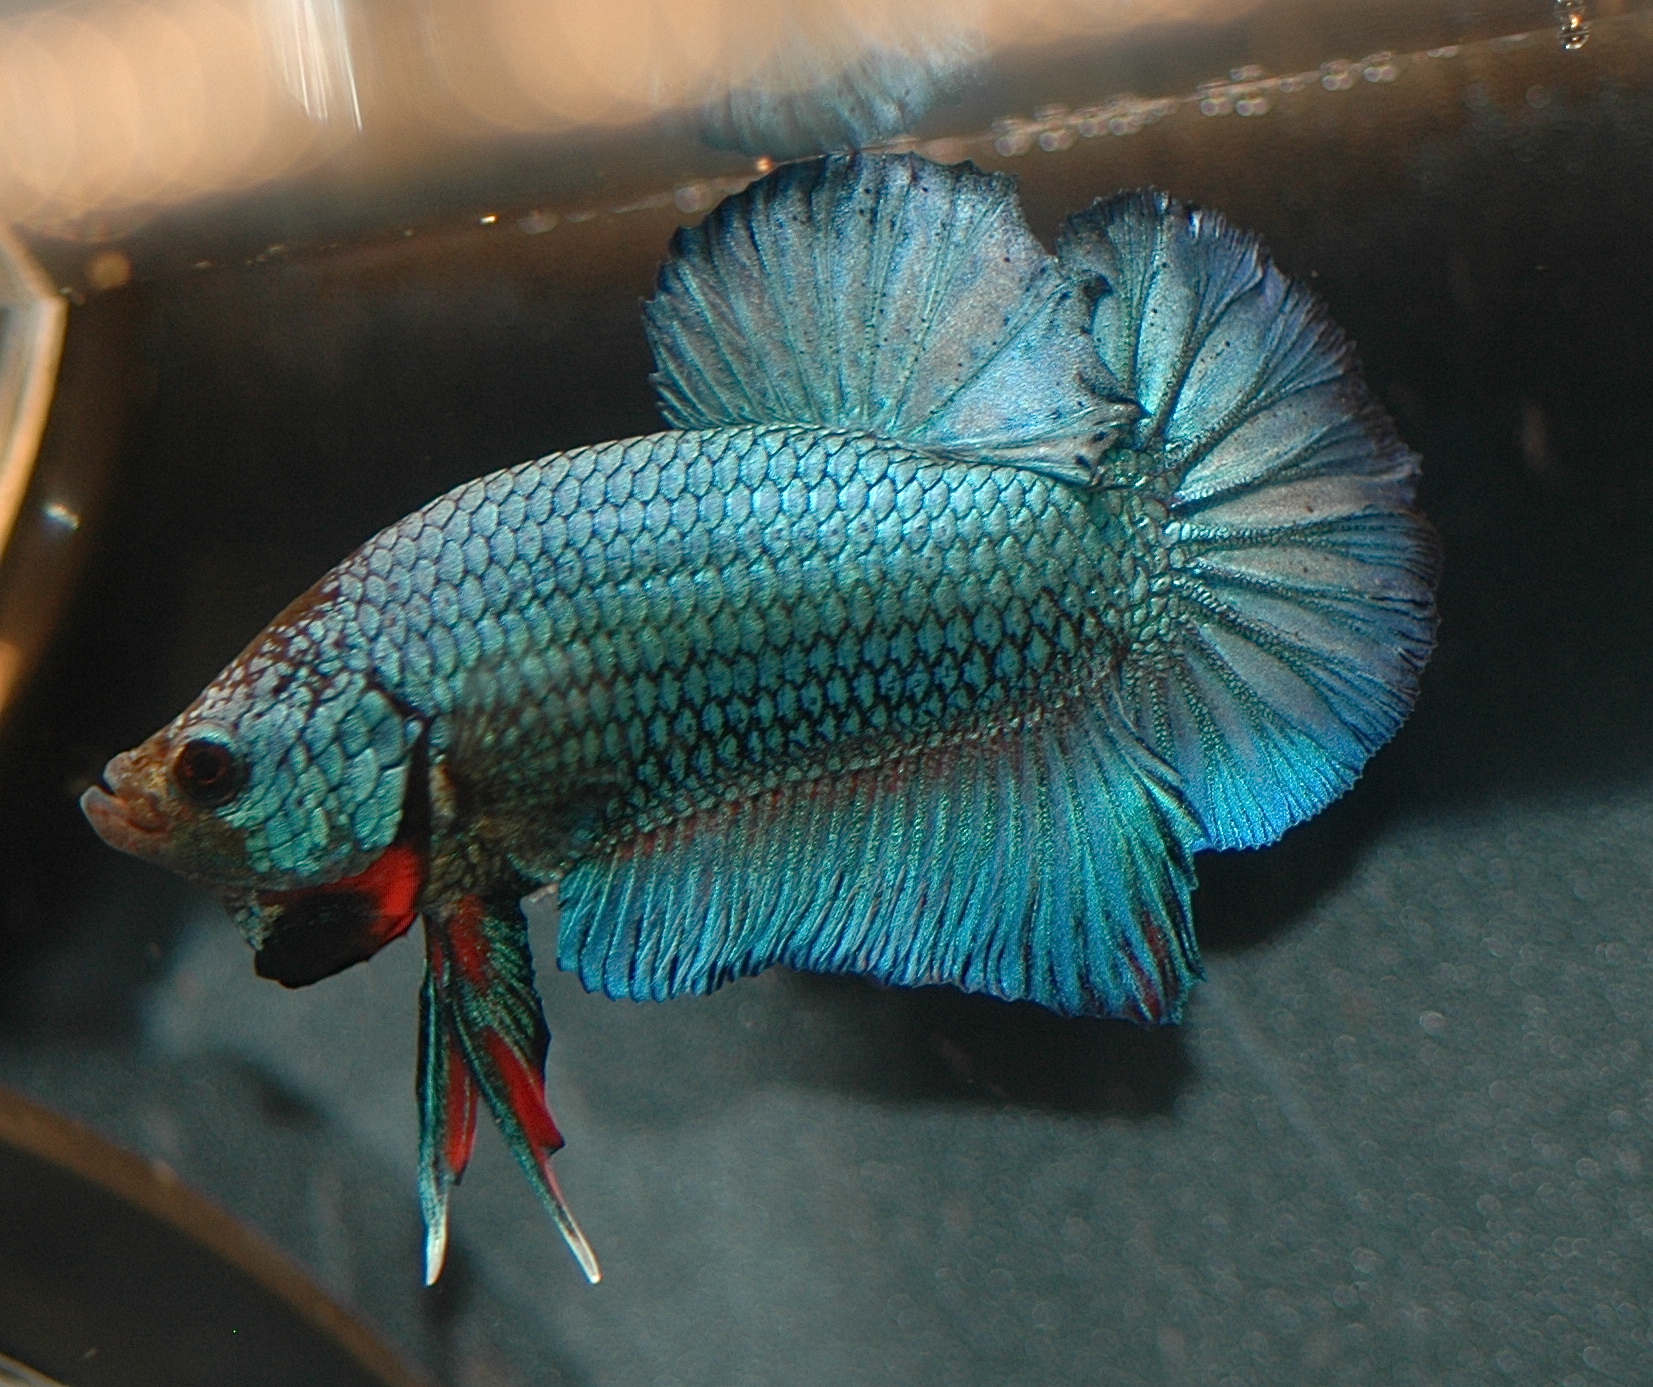 a blue fish with a red tail swimming